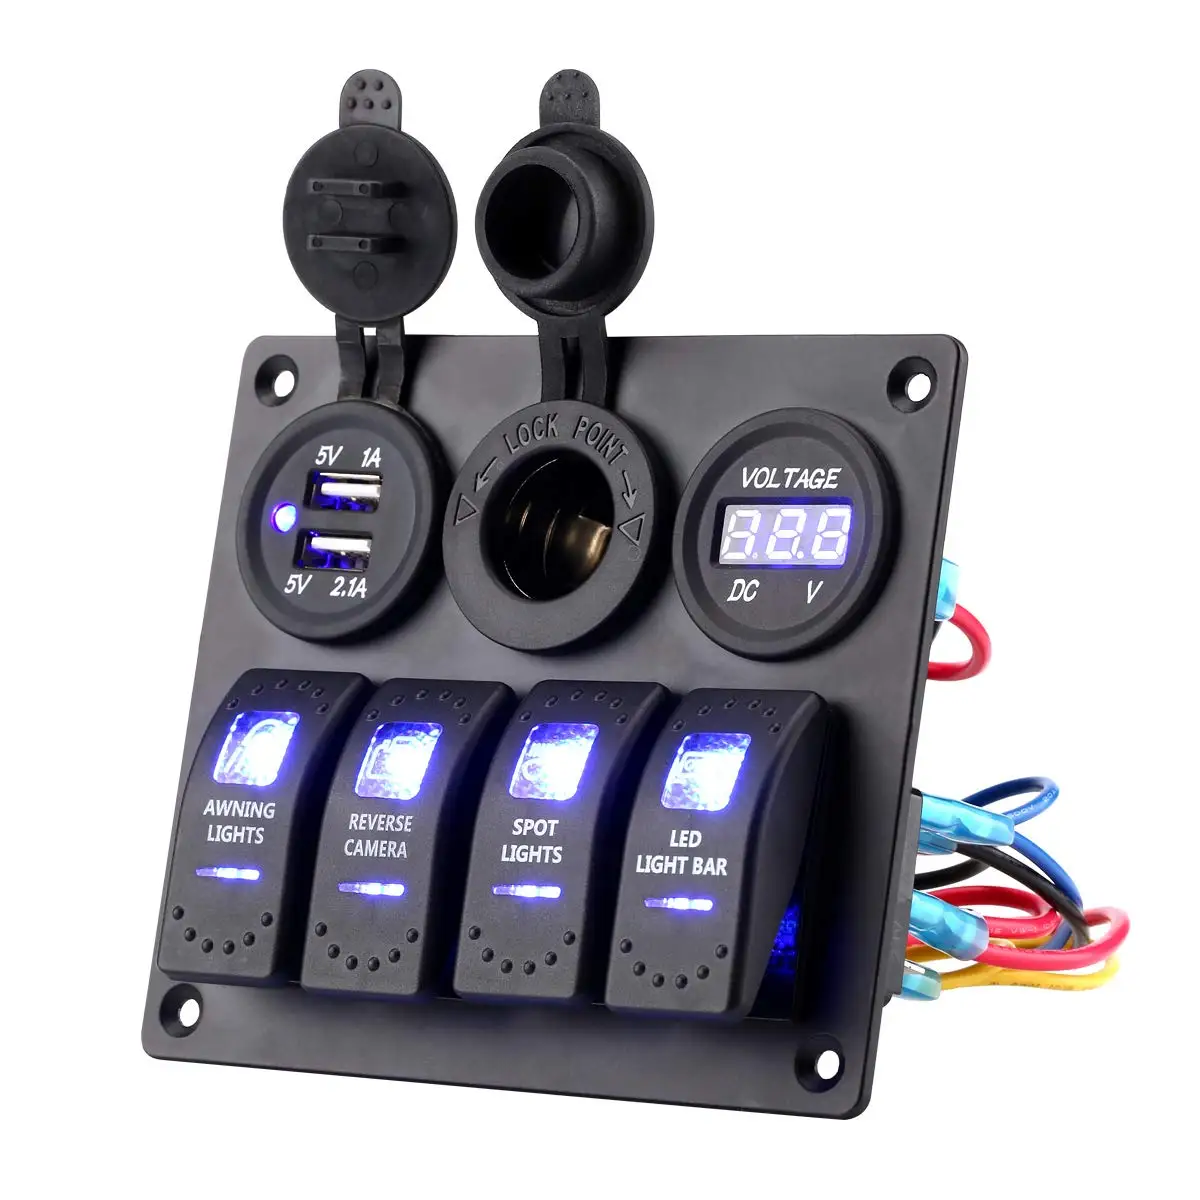 Water Resistant DC12V 16A On-Off Button Circuit Breaker Switch Panel for Car Boat Marine Trailer Trucks 4 Gang 4 Red LED 